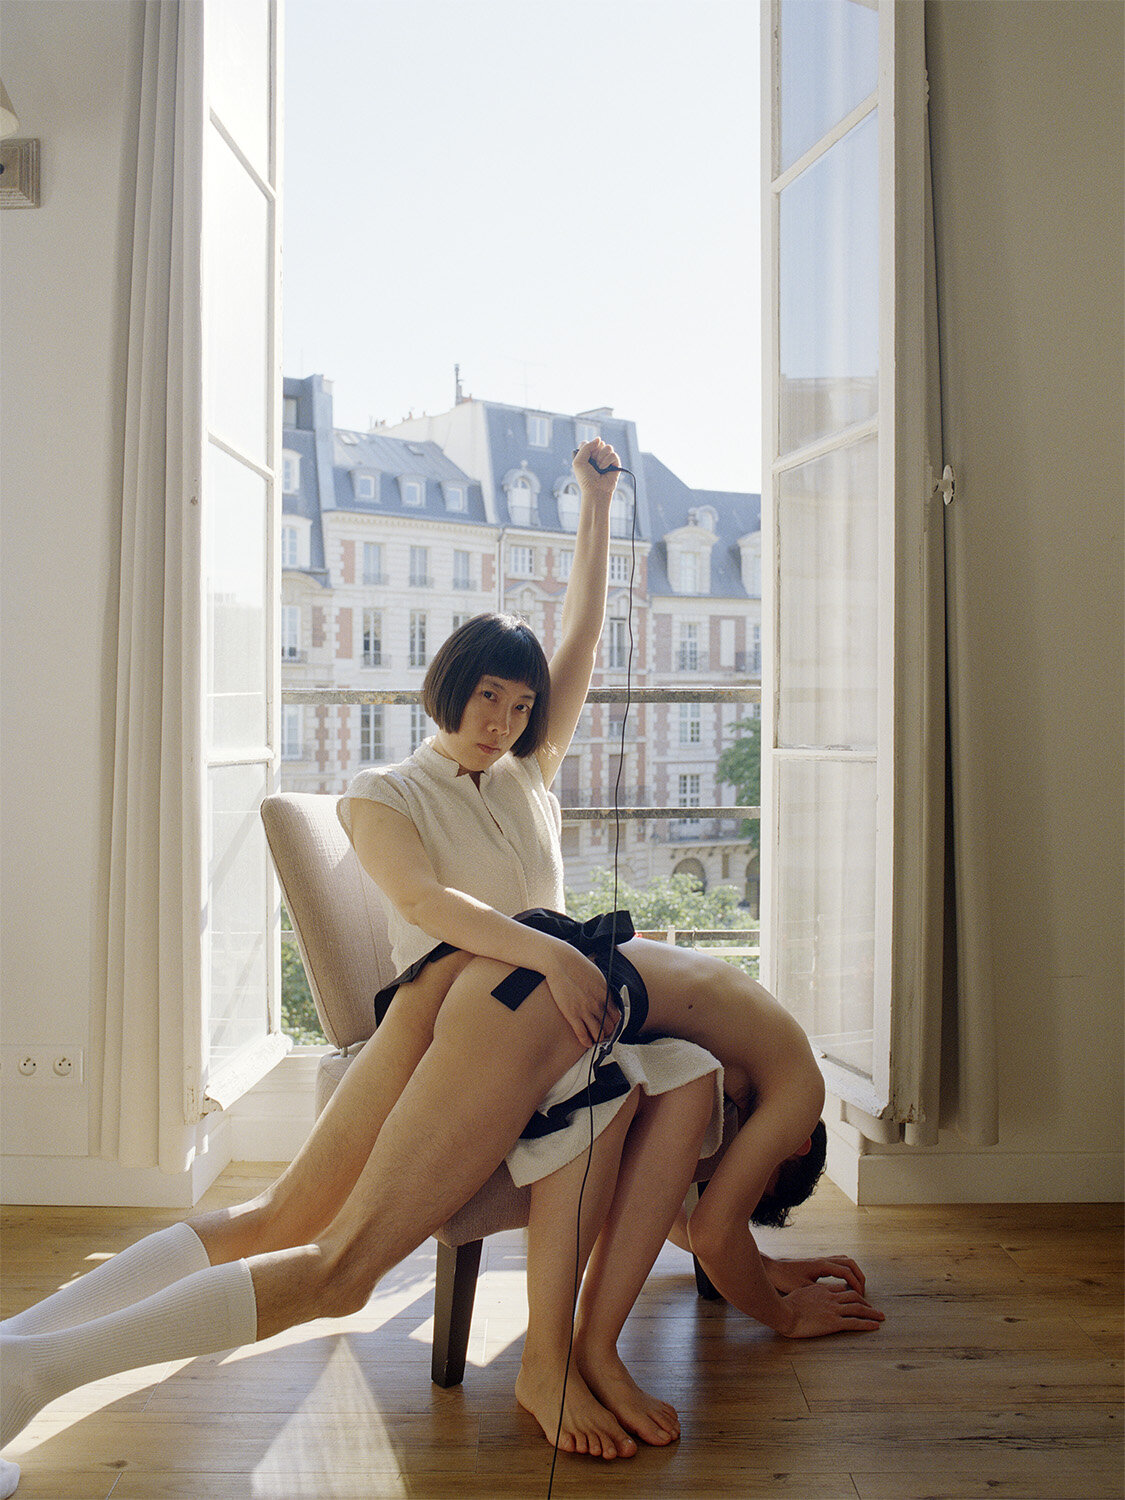 Pixy Liao, a 30-something Chinese woman with short dark hair holds a camera shutter remote with a semi-nude man on her lap.